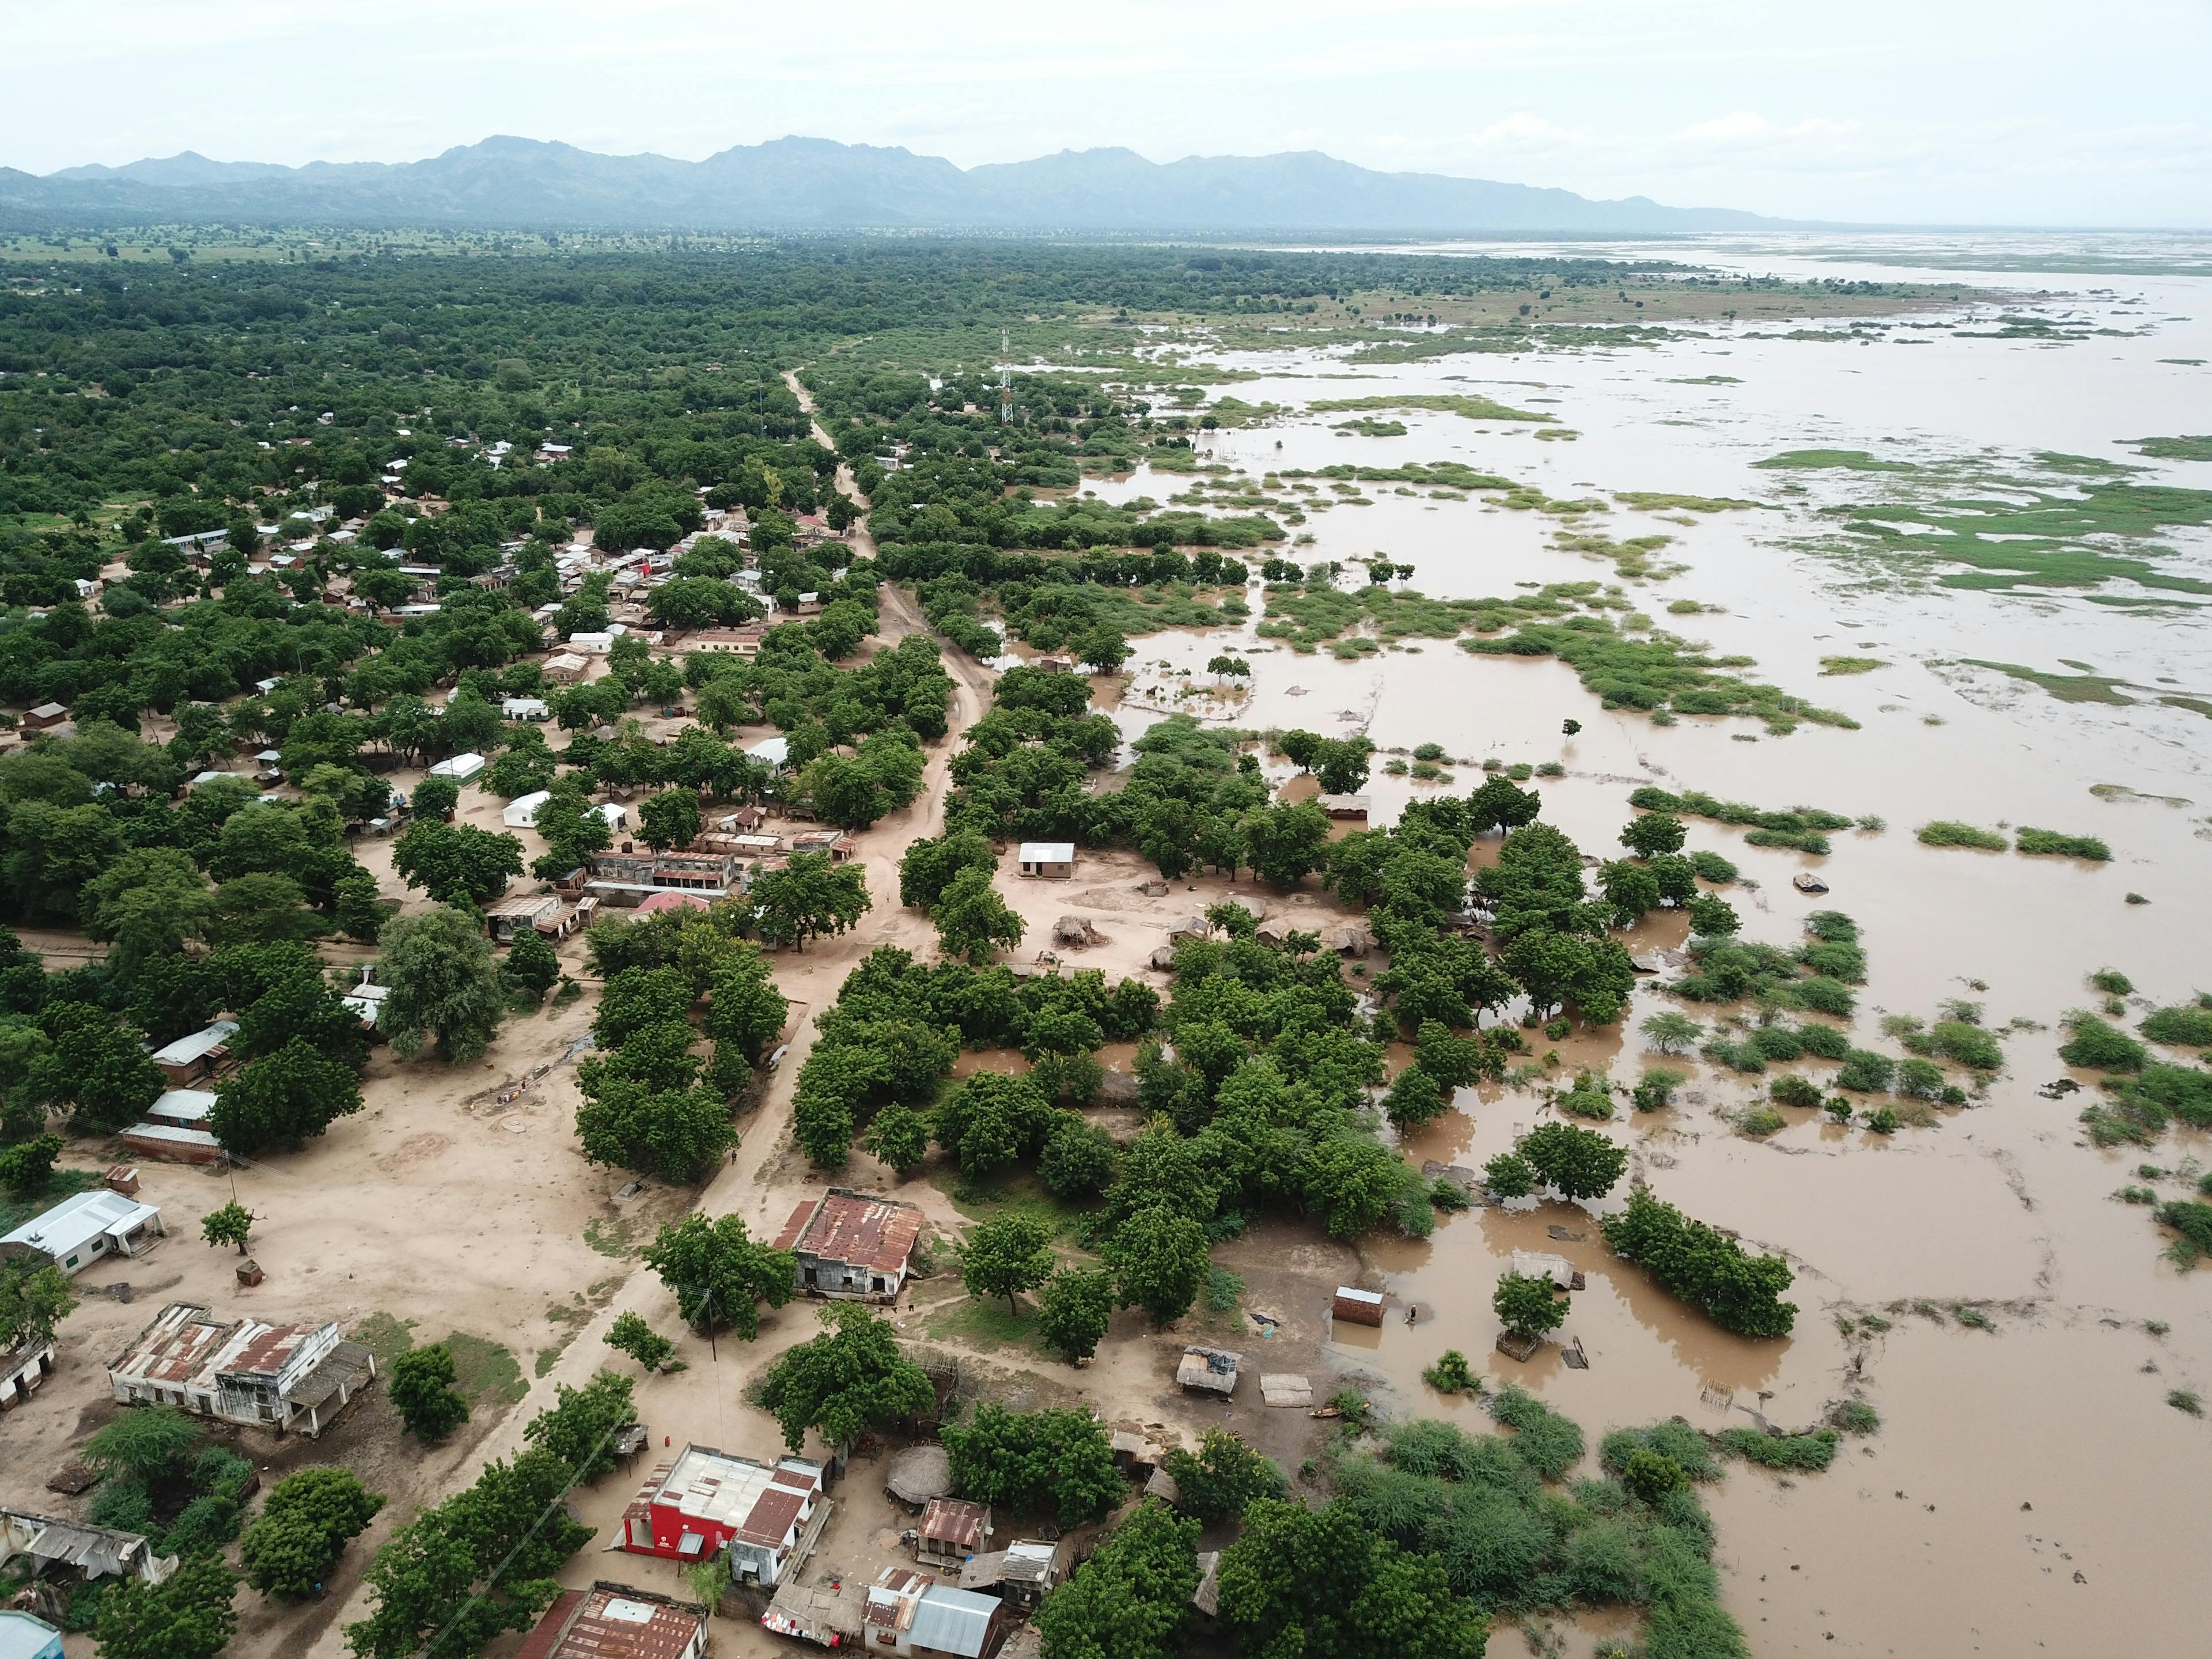 In March 2019, heavy rains and flooding in Malawi caused at least 45 deaths and 577 injuries.